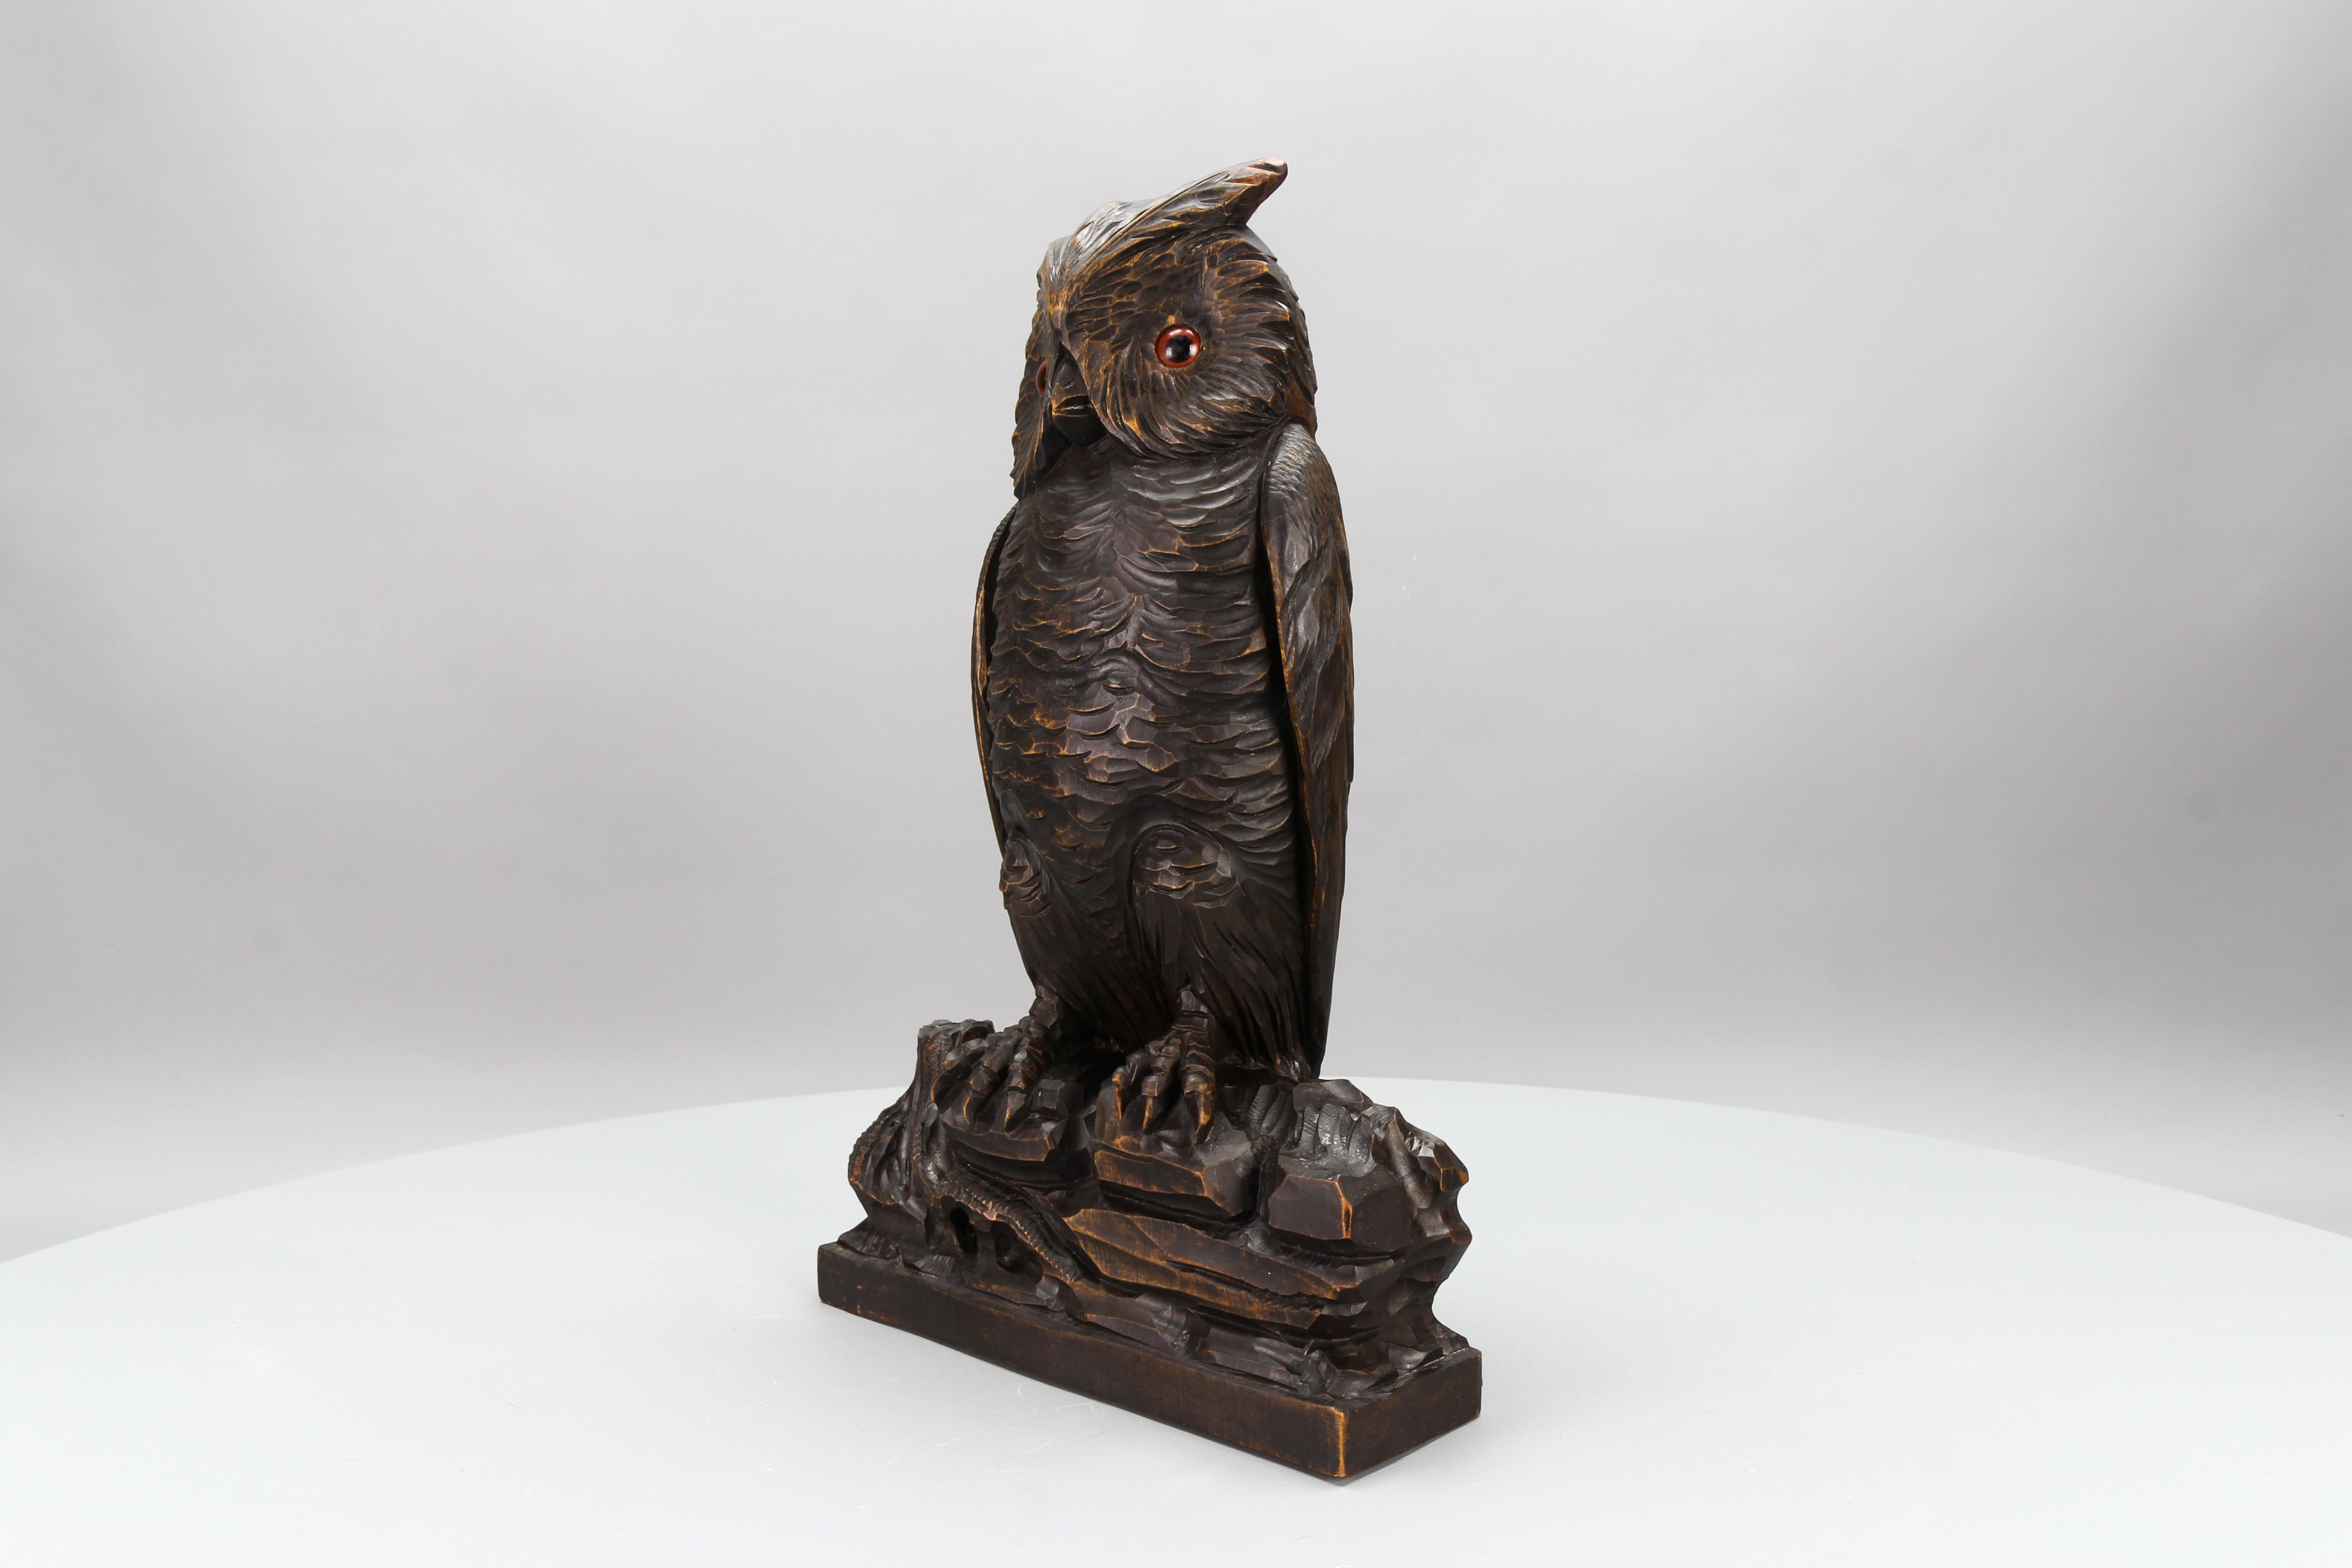 Antique German Black Forest Style Carved Owl Sculpture with Glass Eyes, ca. 1920 For Sale 5